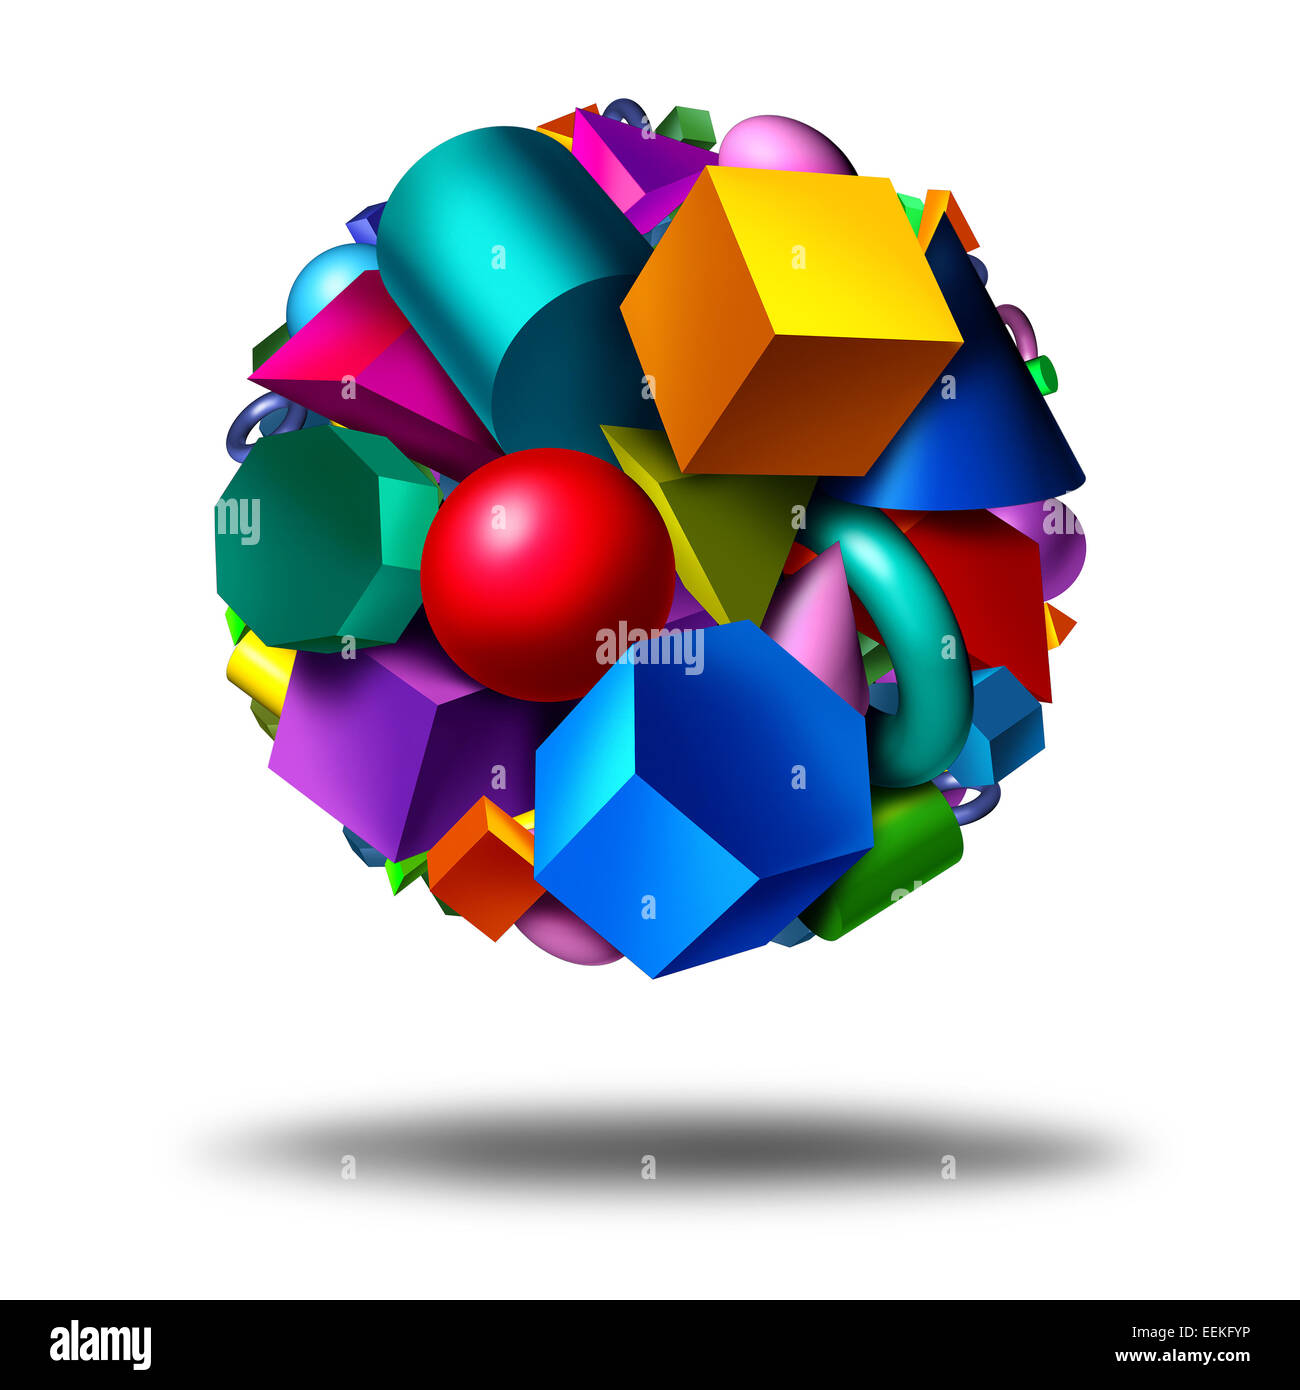 Geometry obects symbol as a group of three dimensional geometric shapes in the form of a globe with figures as a cube sphere cylinder floating on a white background as an education and math learning concept. Stock Photo